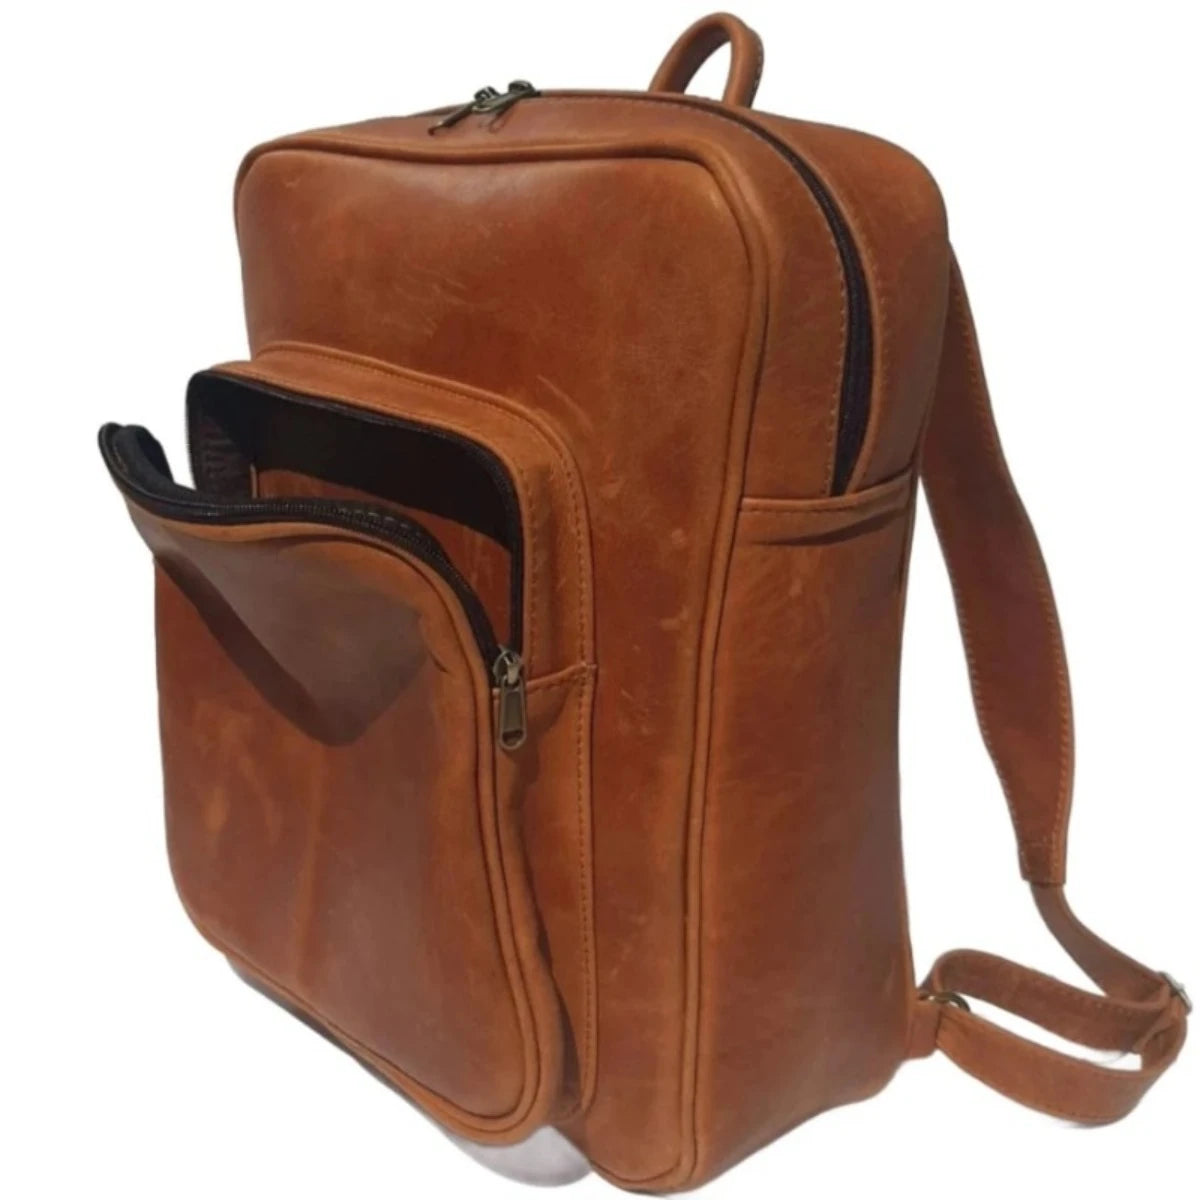 Genuine leather Everyday laptop  backpacks 15"  Designed by Cape Masai leather. 